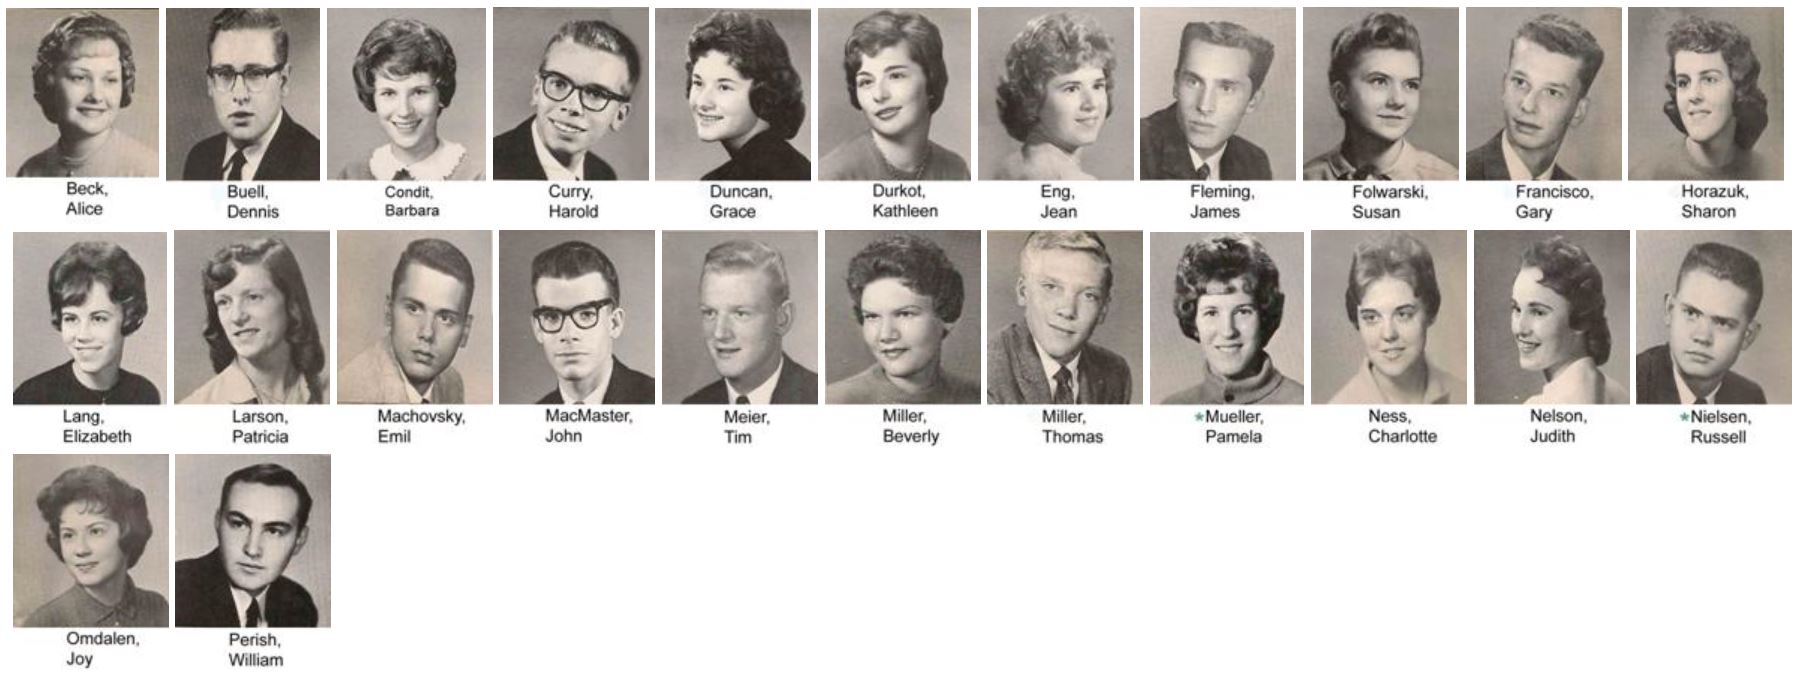 Missing Marshallites from class of 1961